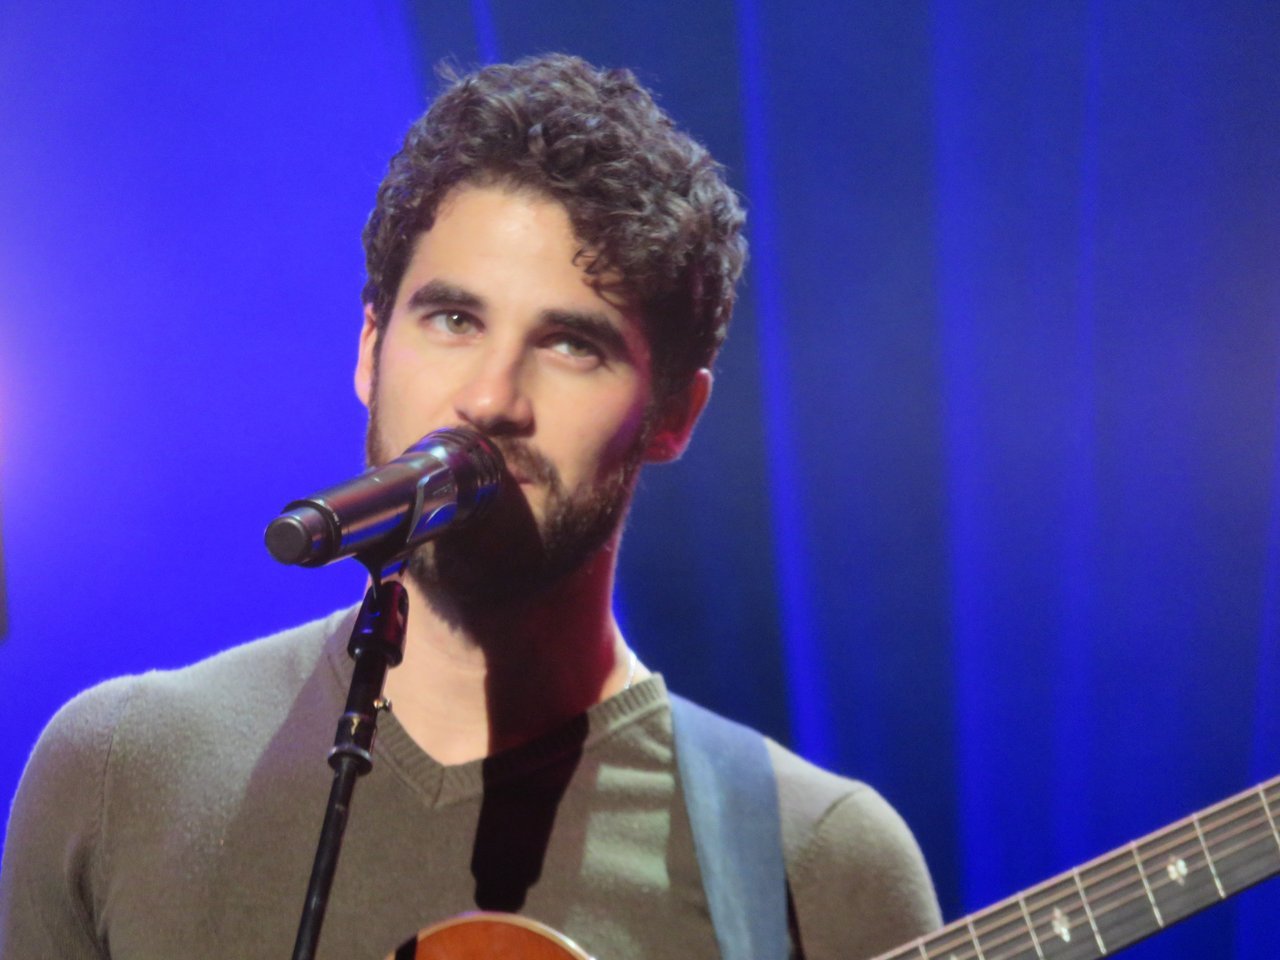 LMDCtour - Darren's Concerts and Other Musical Performancs for 2018 - Page 4 Tumblr_pa69oxiWhg1wpi2k2o6_1280